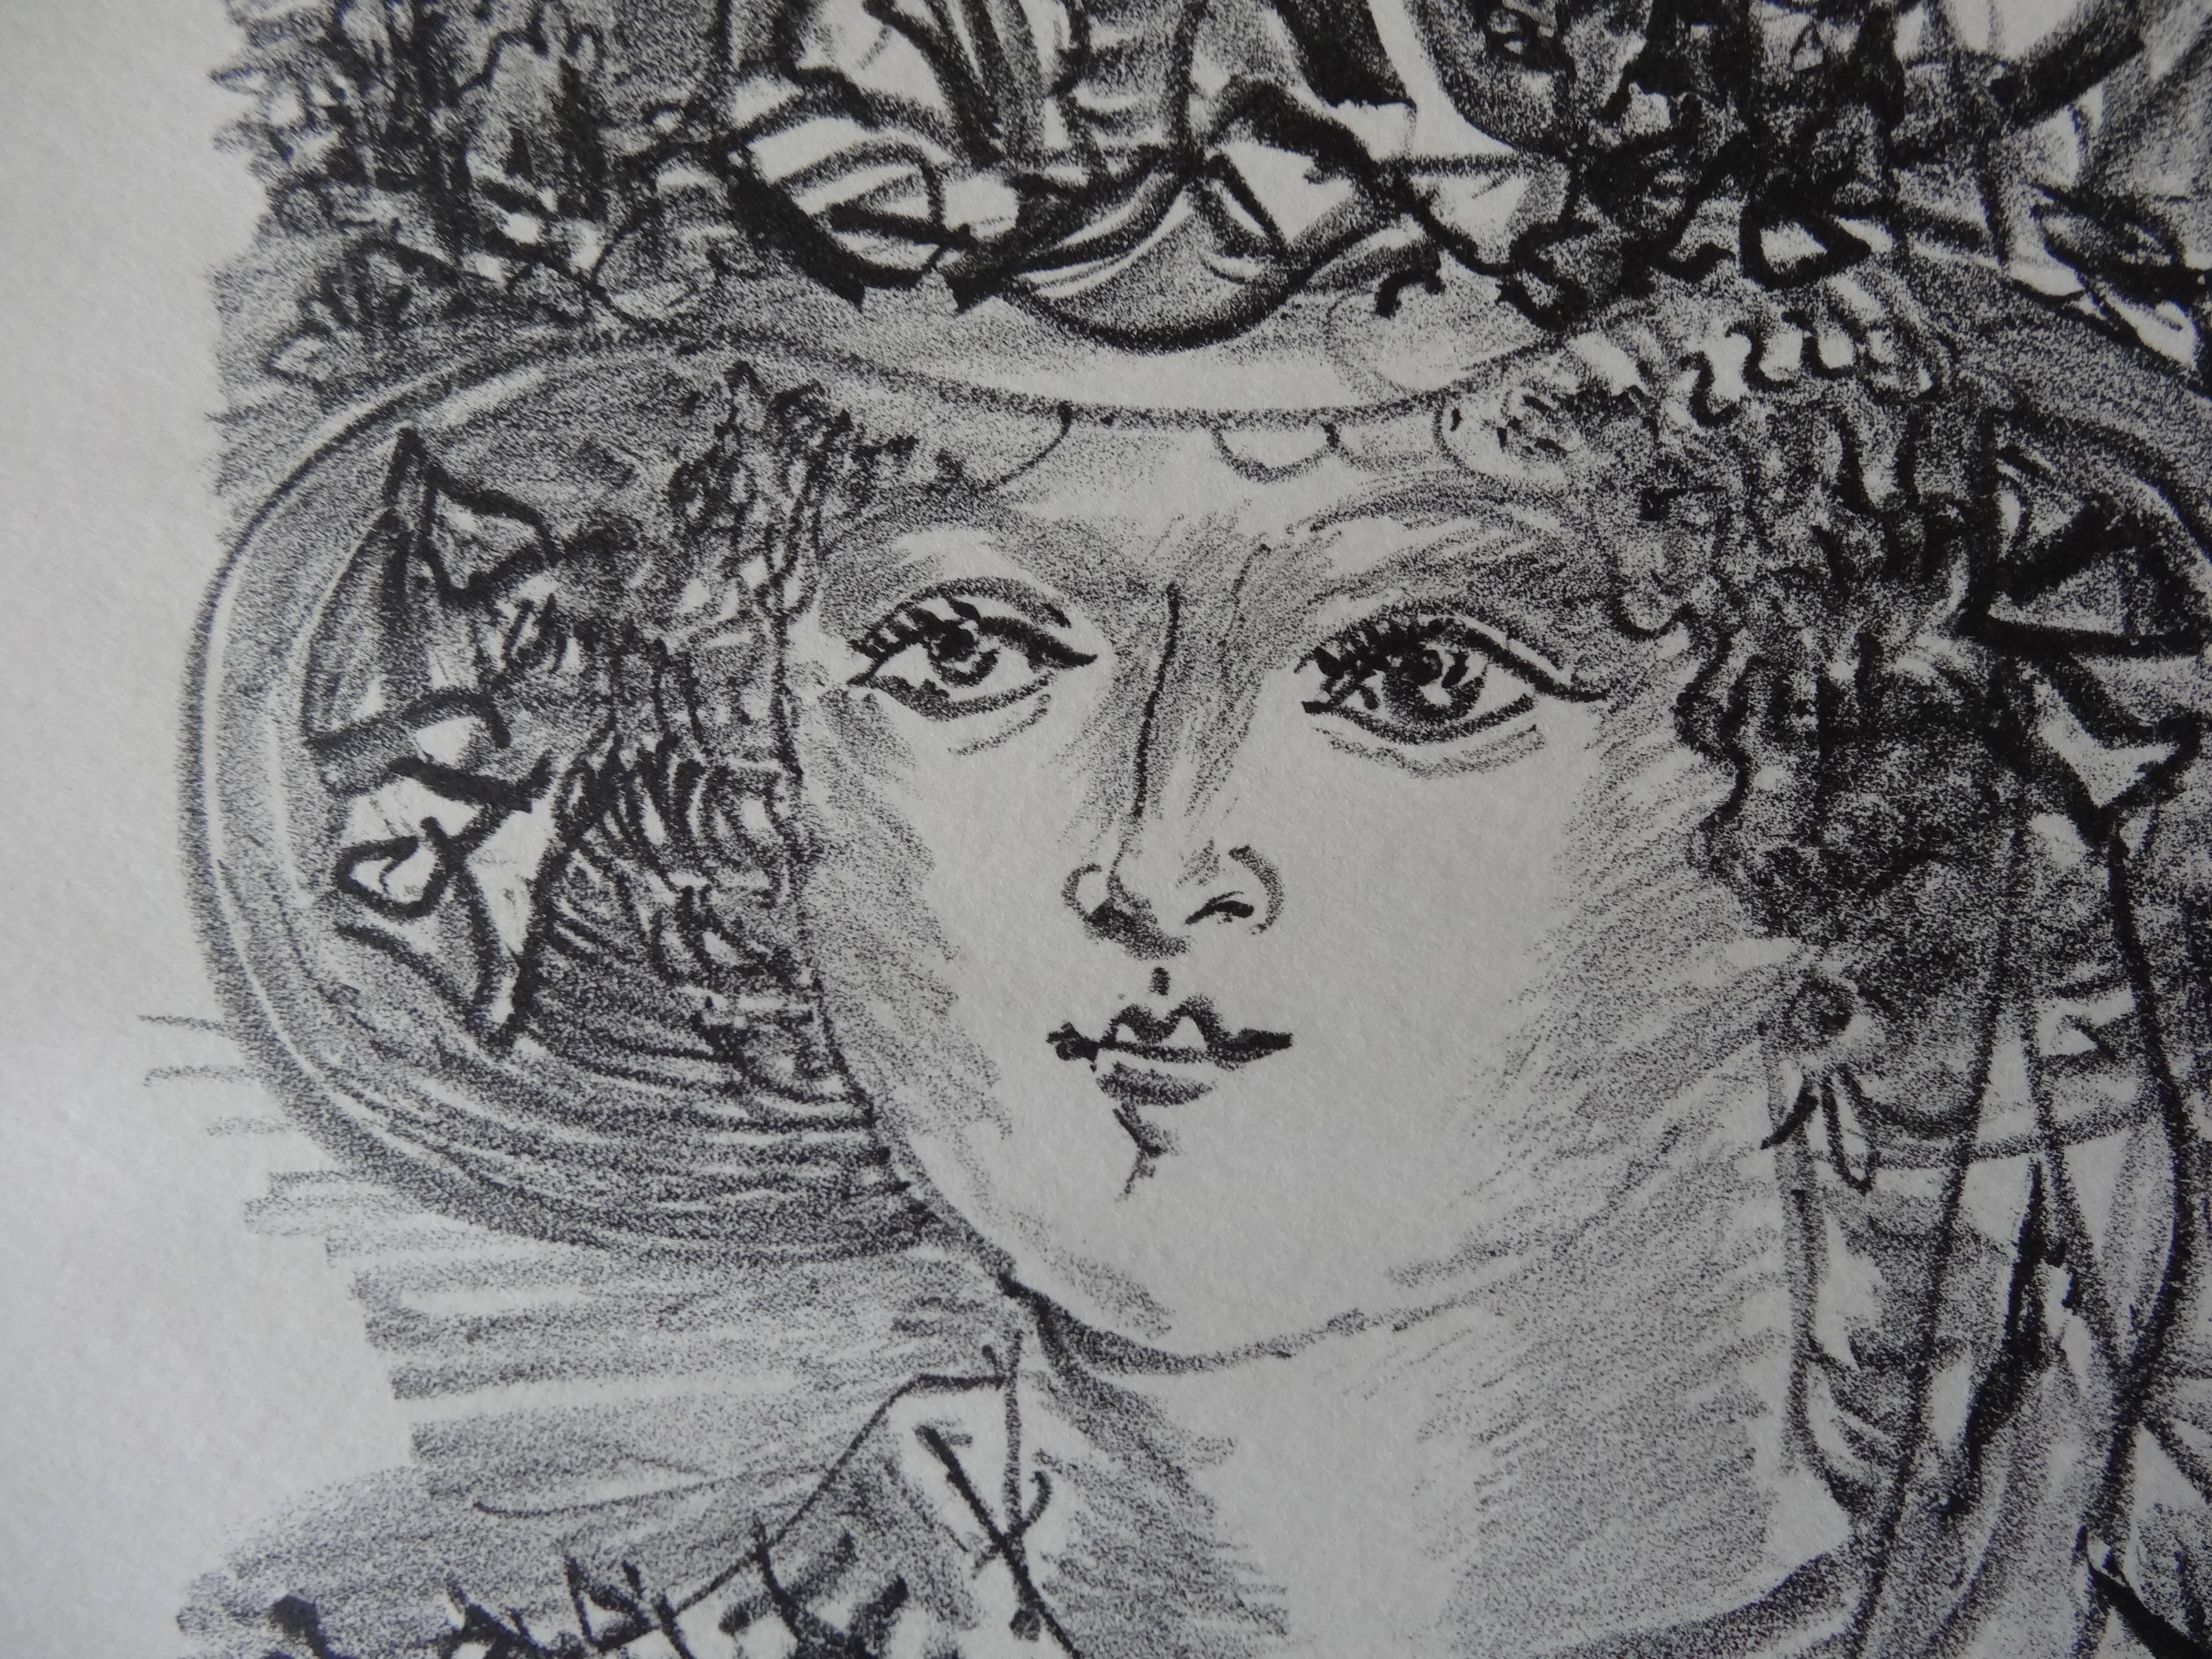 Woman with Funny Hat - Stone lithograph, 1930 - Modern Print by Raoul Dufy